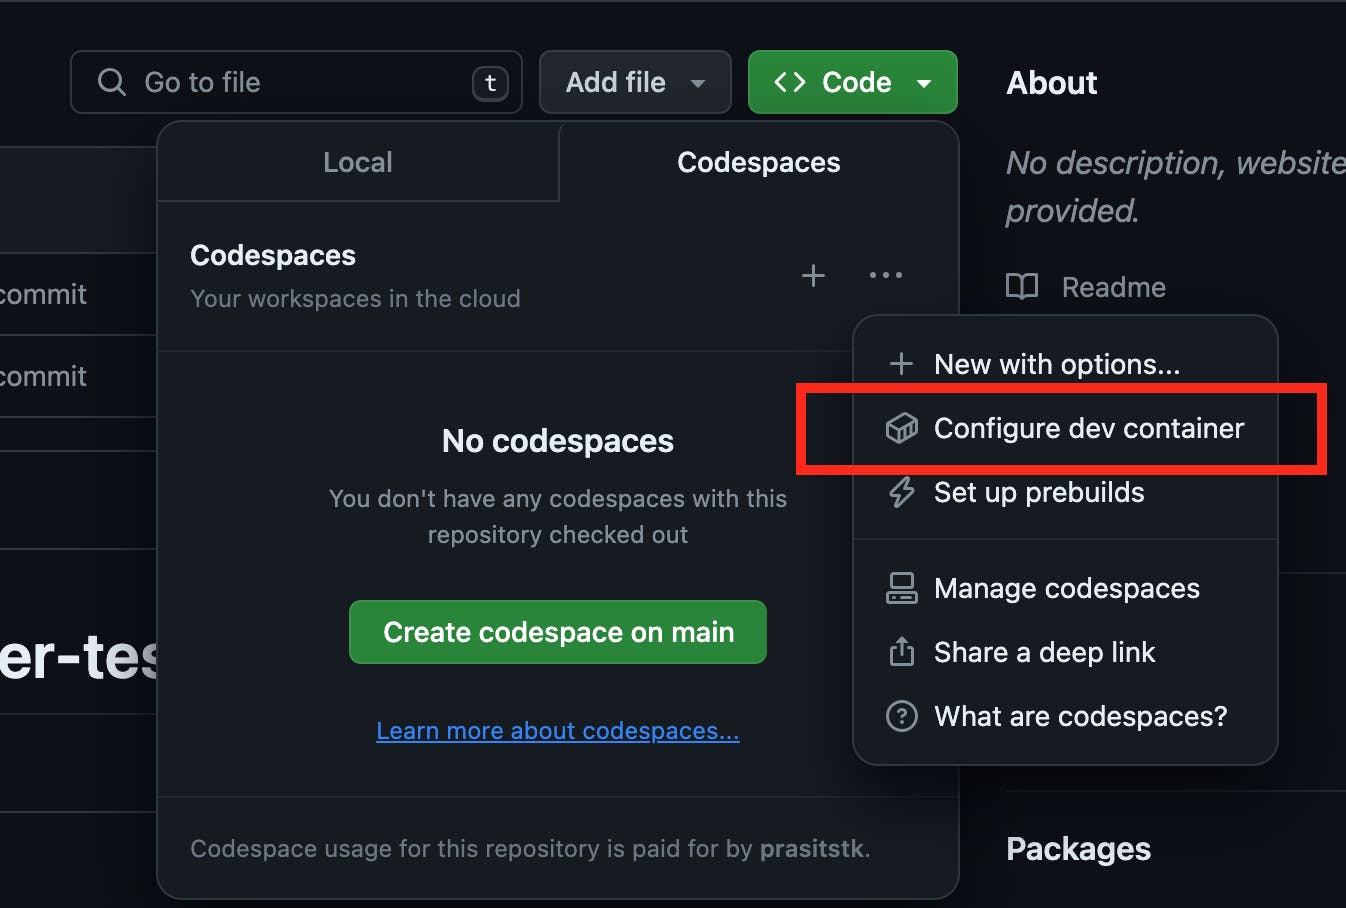 Select menu to configure dev container on your repository